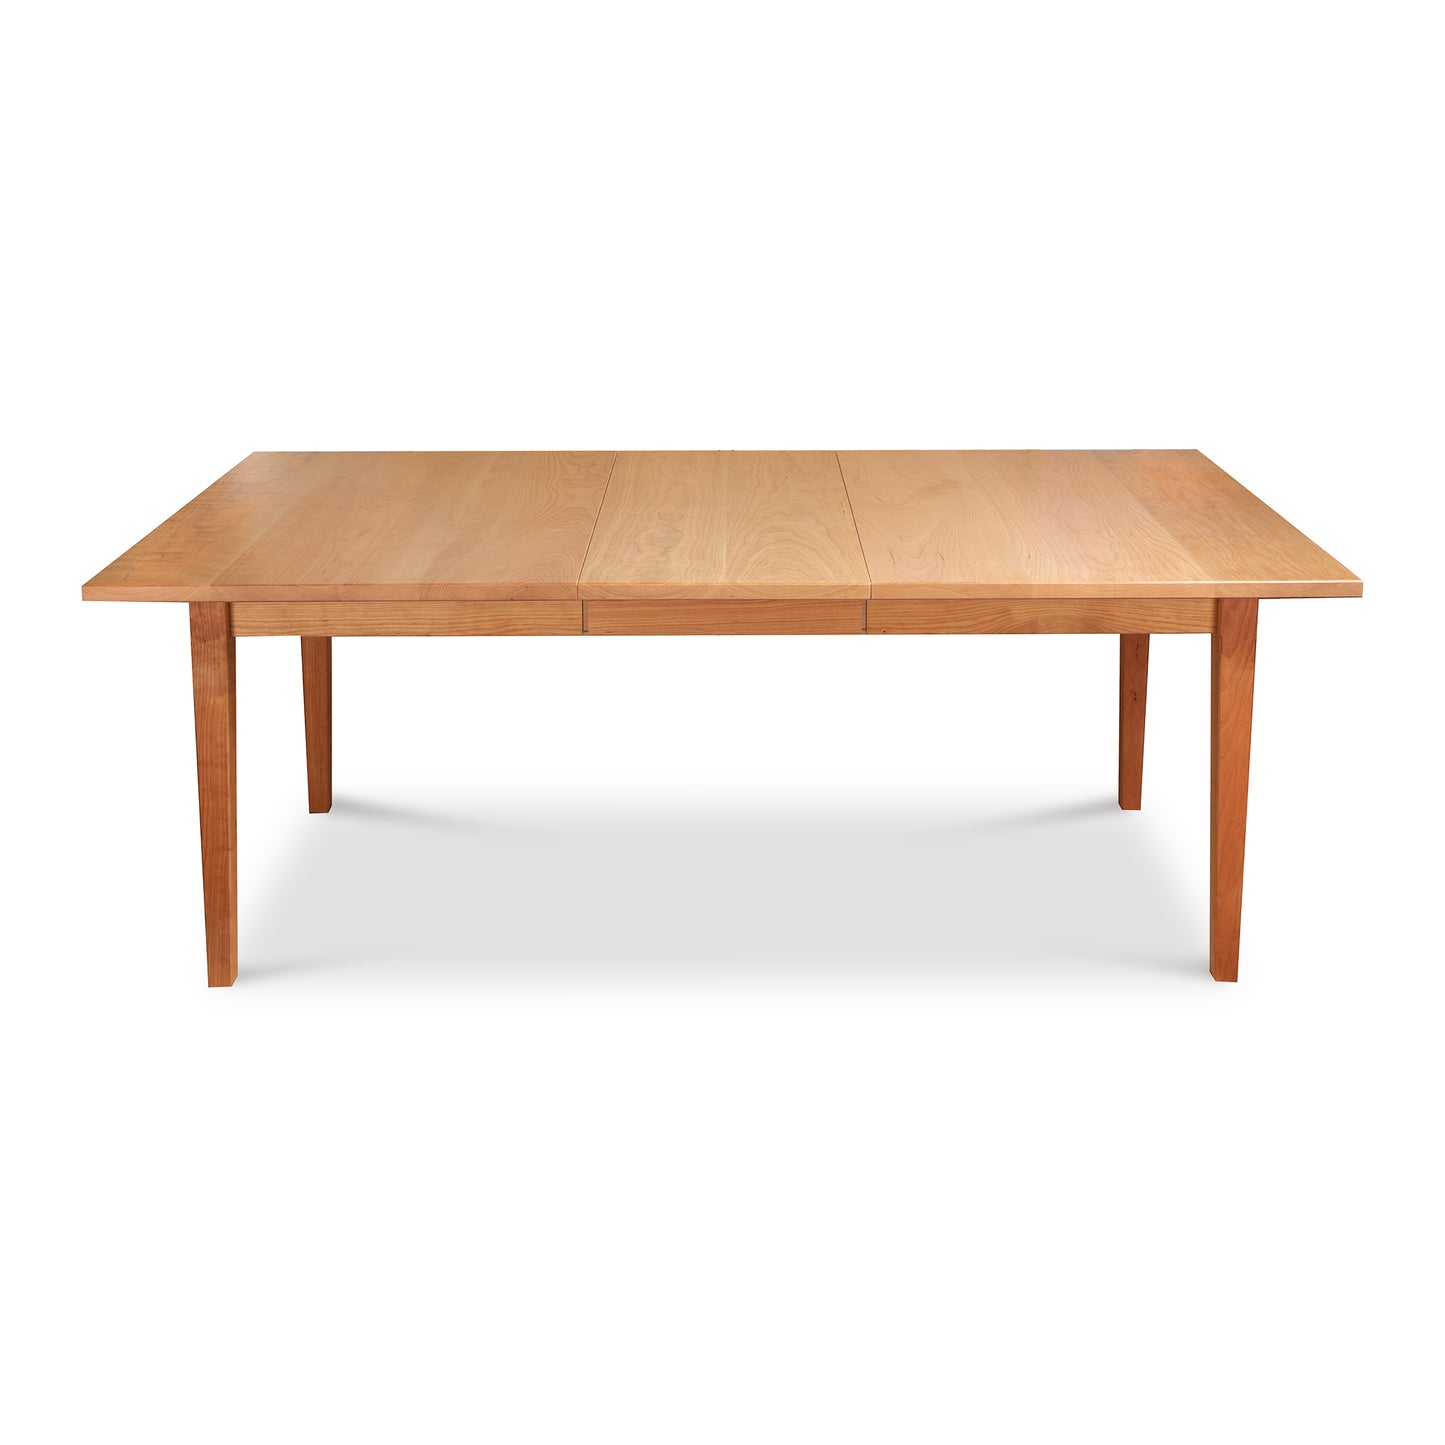 A Vermont Shaker Rectangular Extension Dining Table made from sustainably harvested wood, with extendable leaves on each end, standing on four legs, isolated against a white background. - Maple Corner Woodworks